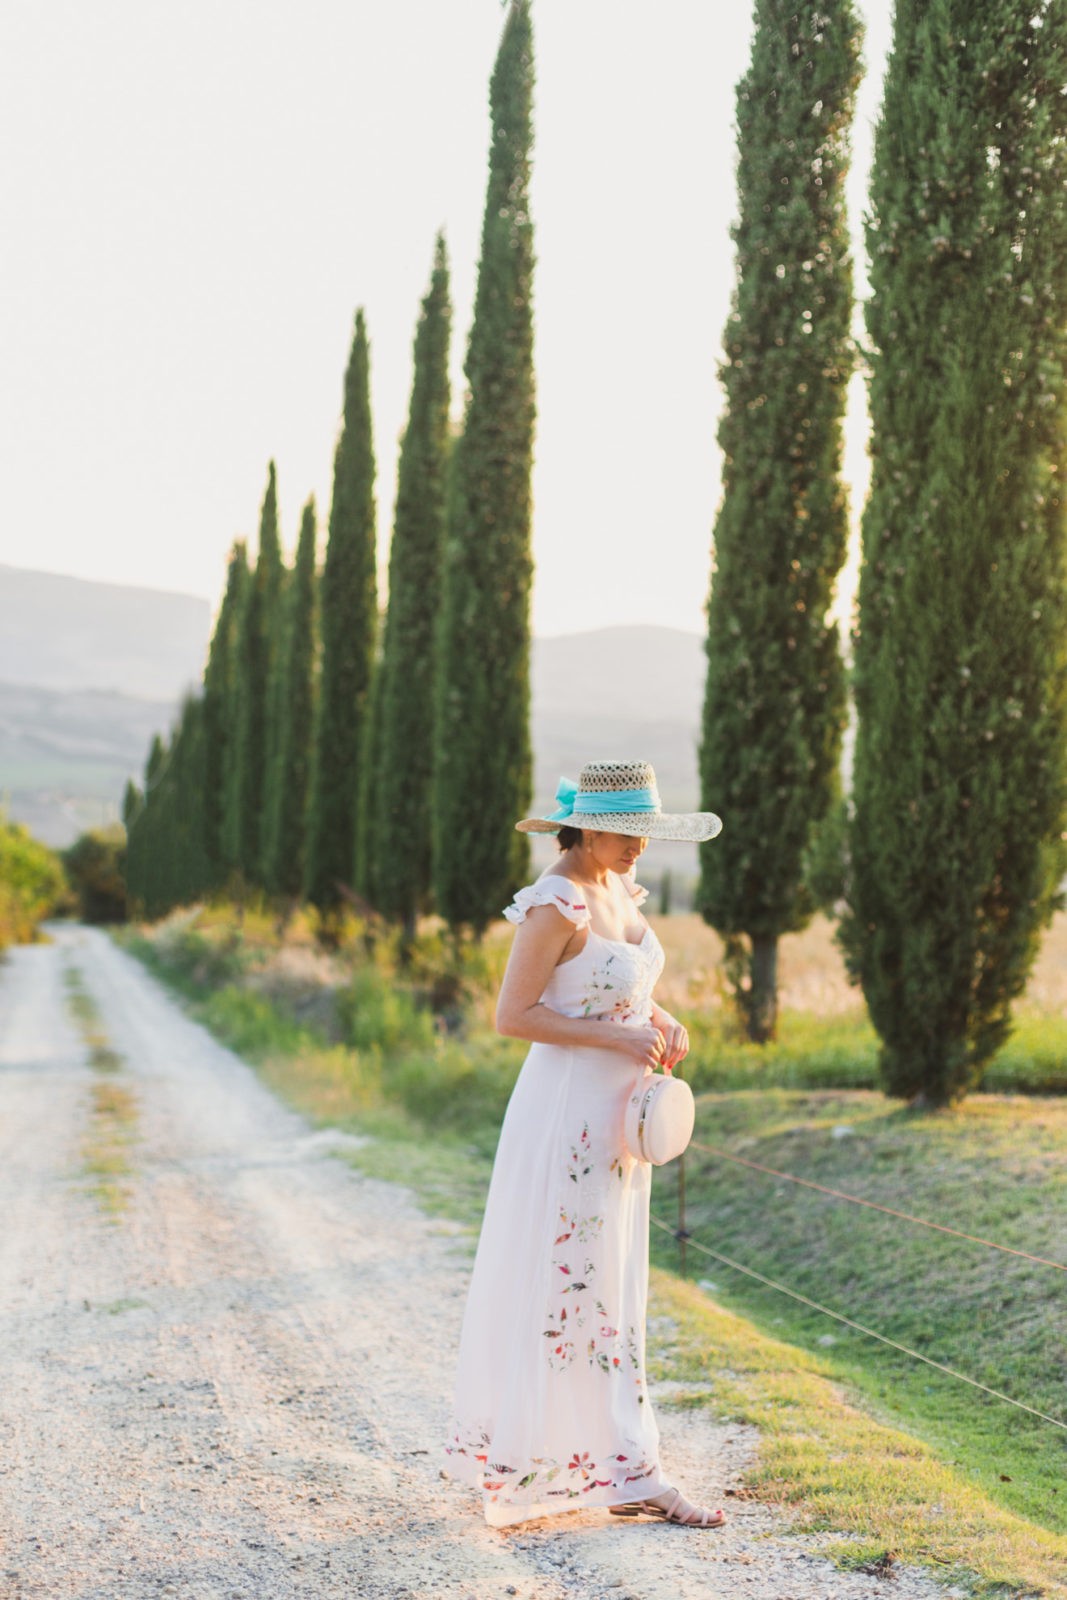 Anthropologie Dress | The Tuscan Countryside + Italy Recap featured by popular Los Angeles travel blogger Laura Lily